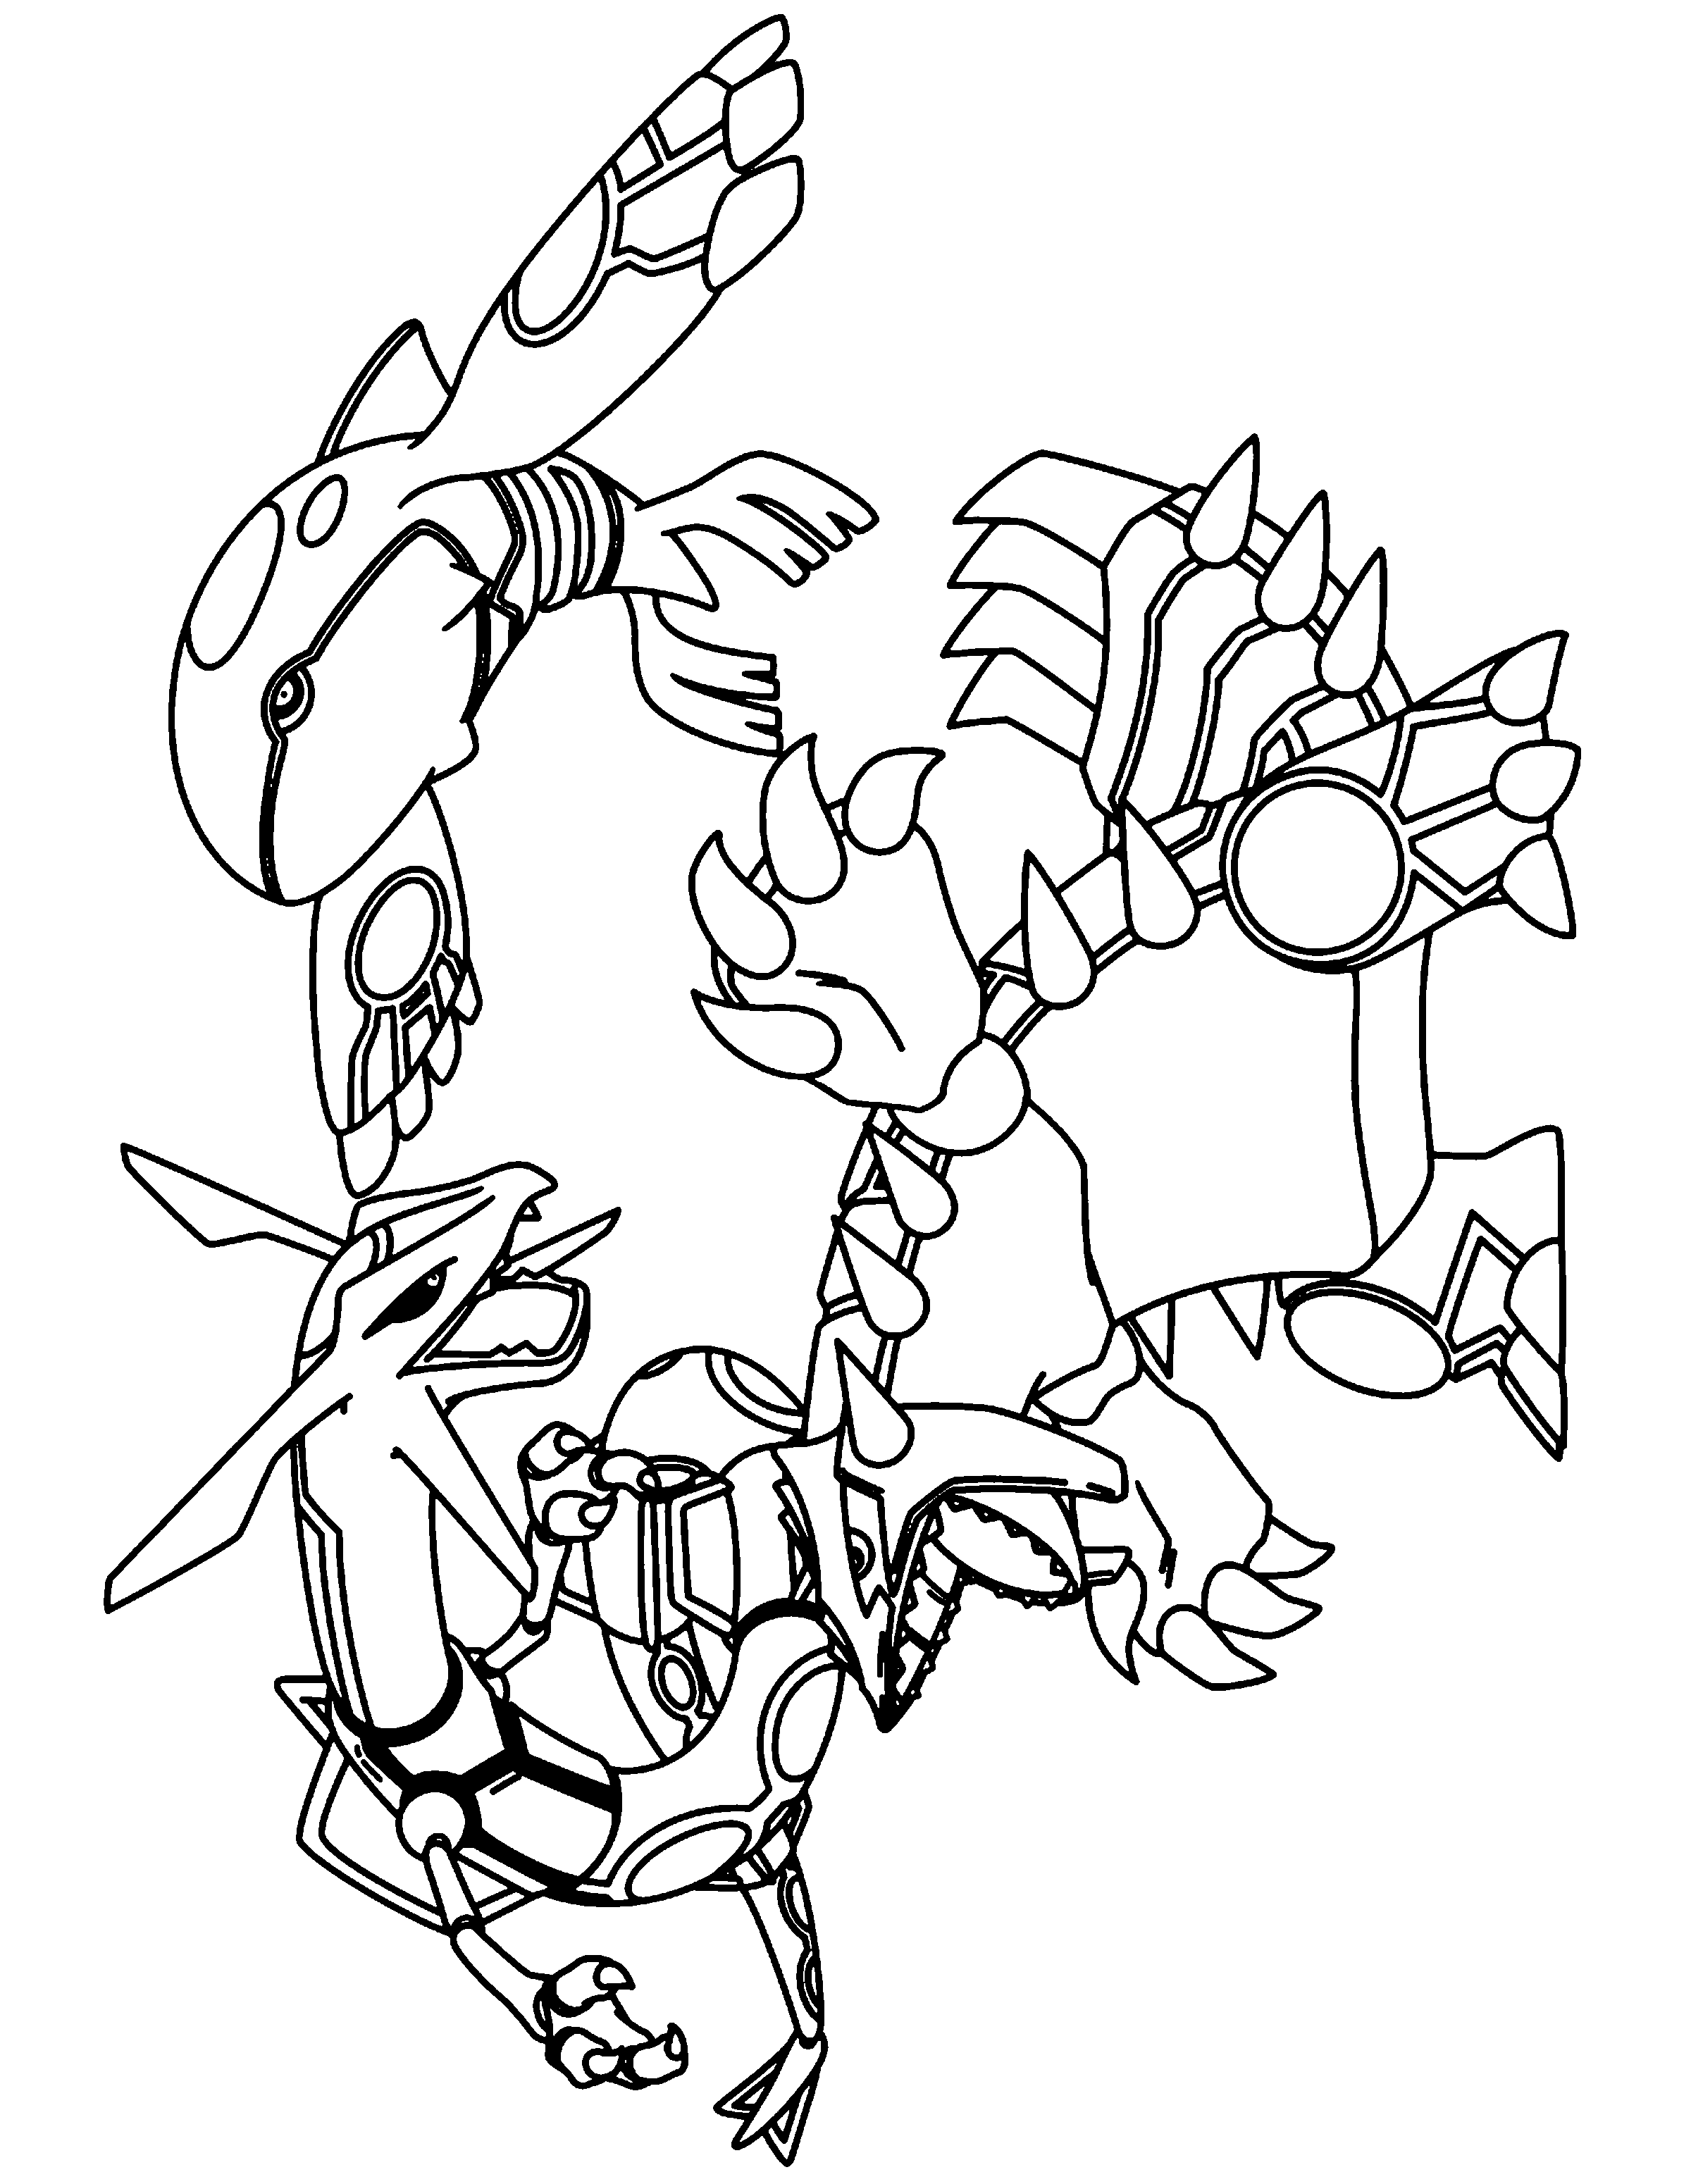 Rayquaza coloring pages download and print for free